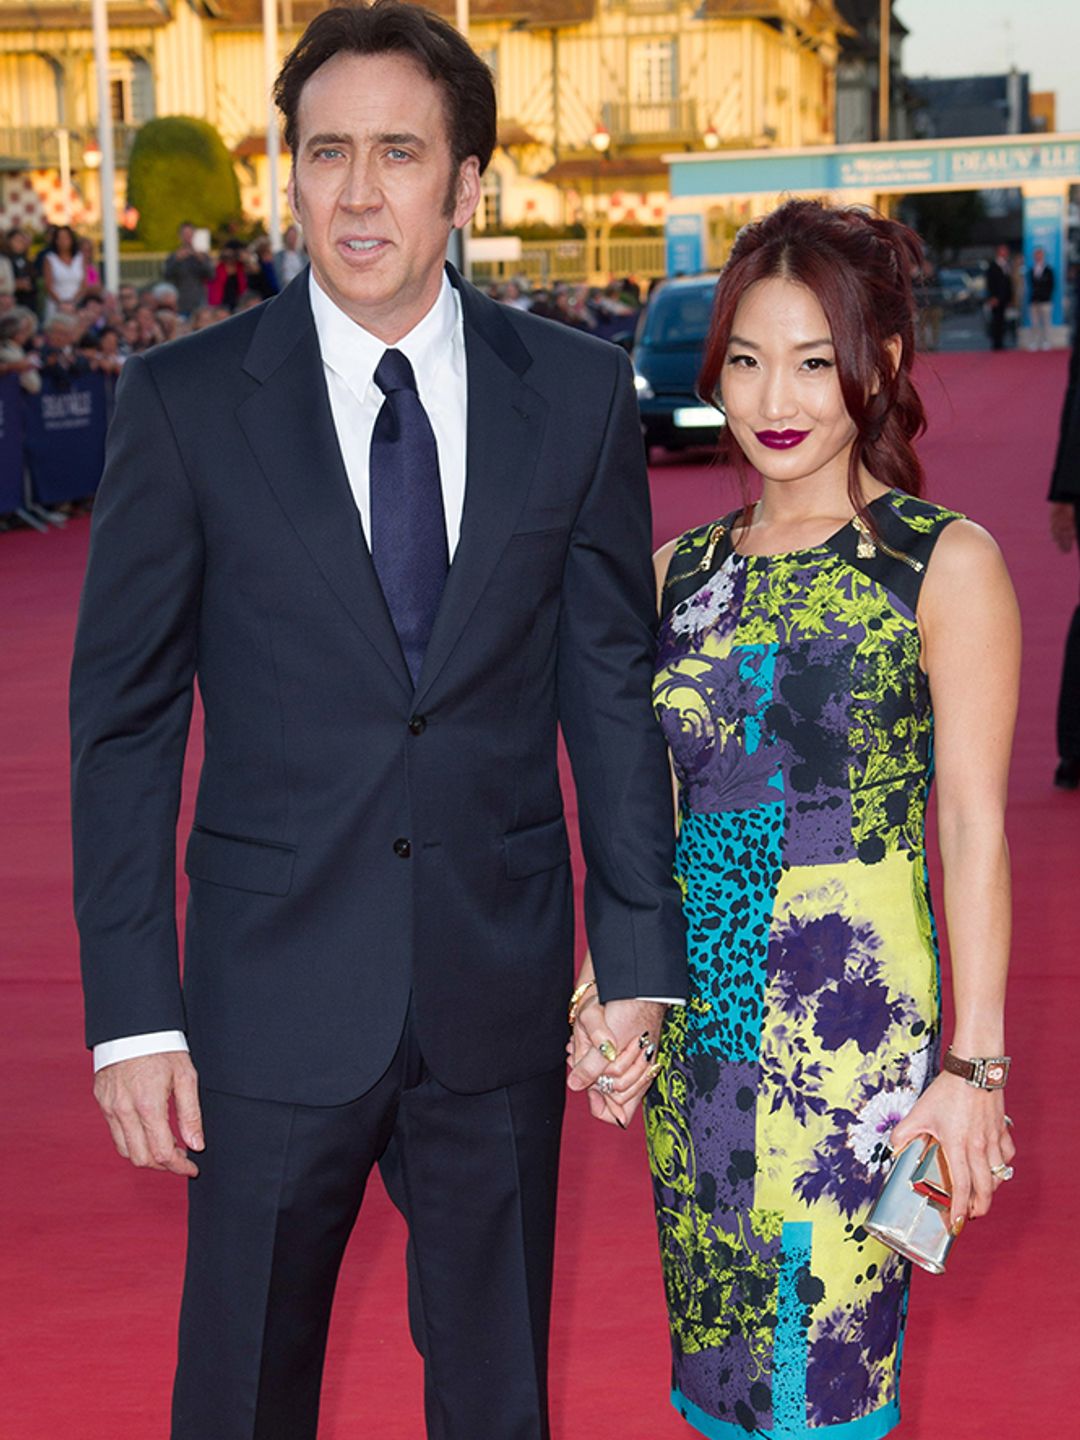 Nicolas Cage and his third wife Alice Kim on the red carpet